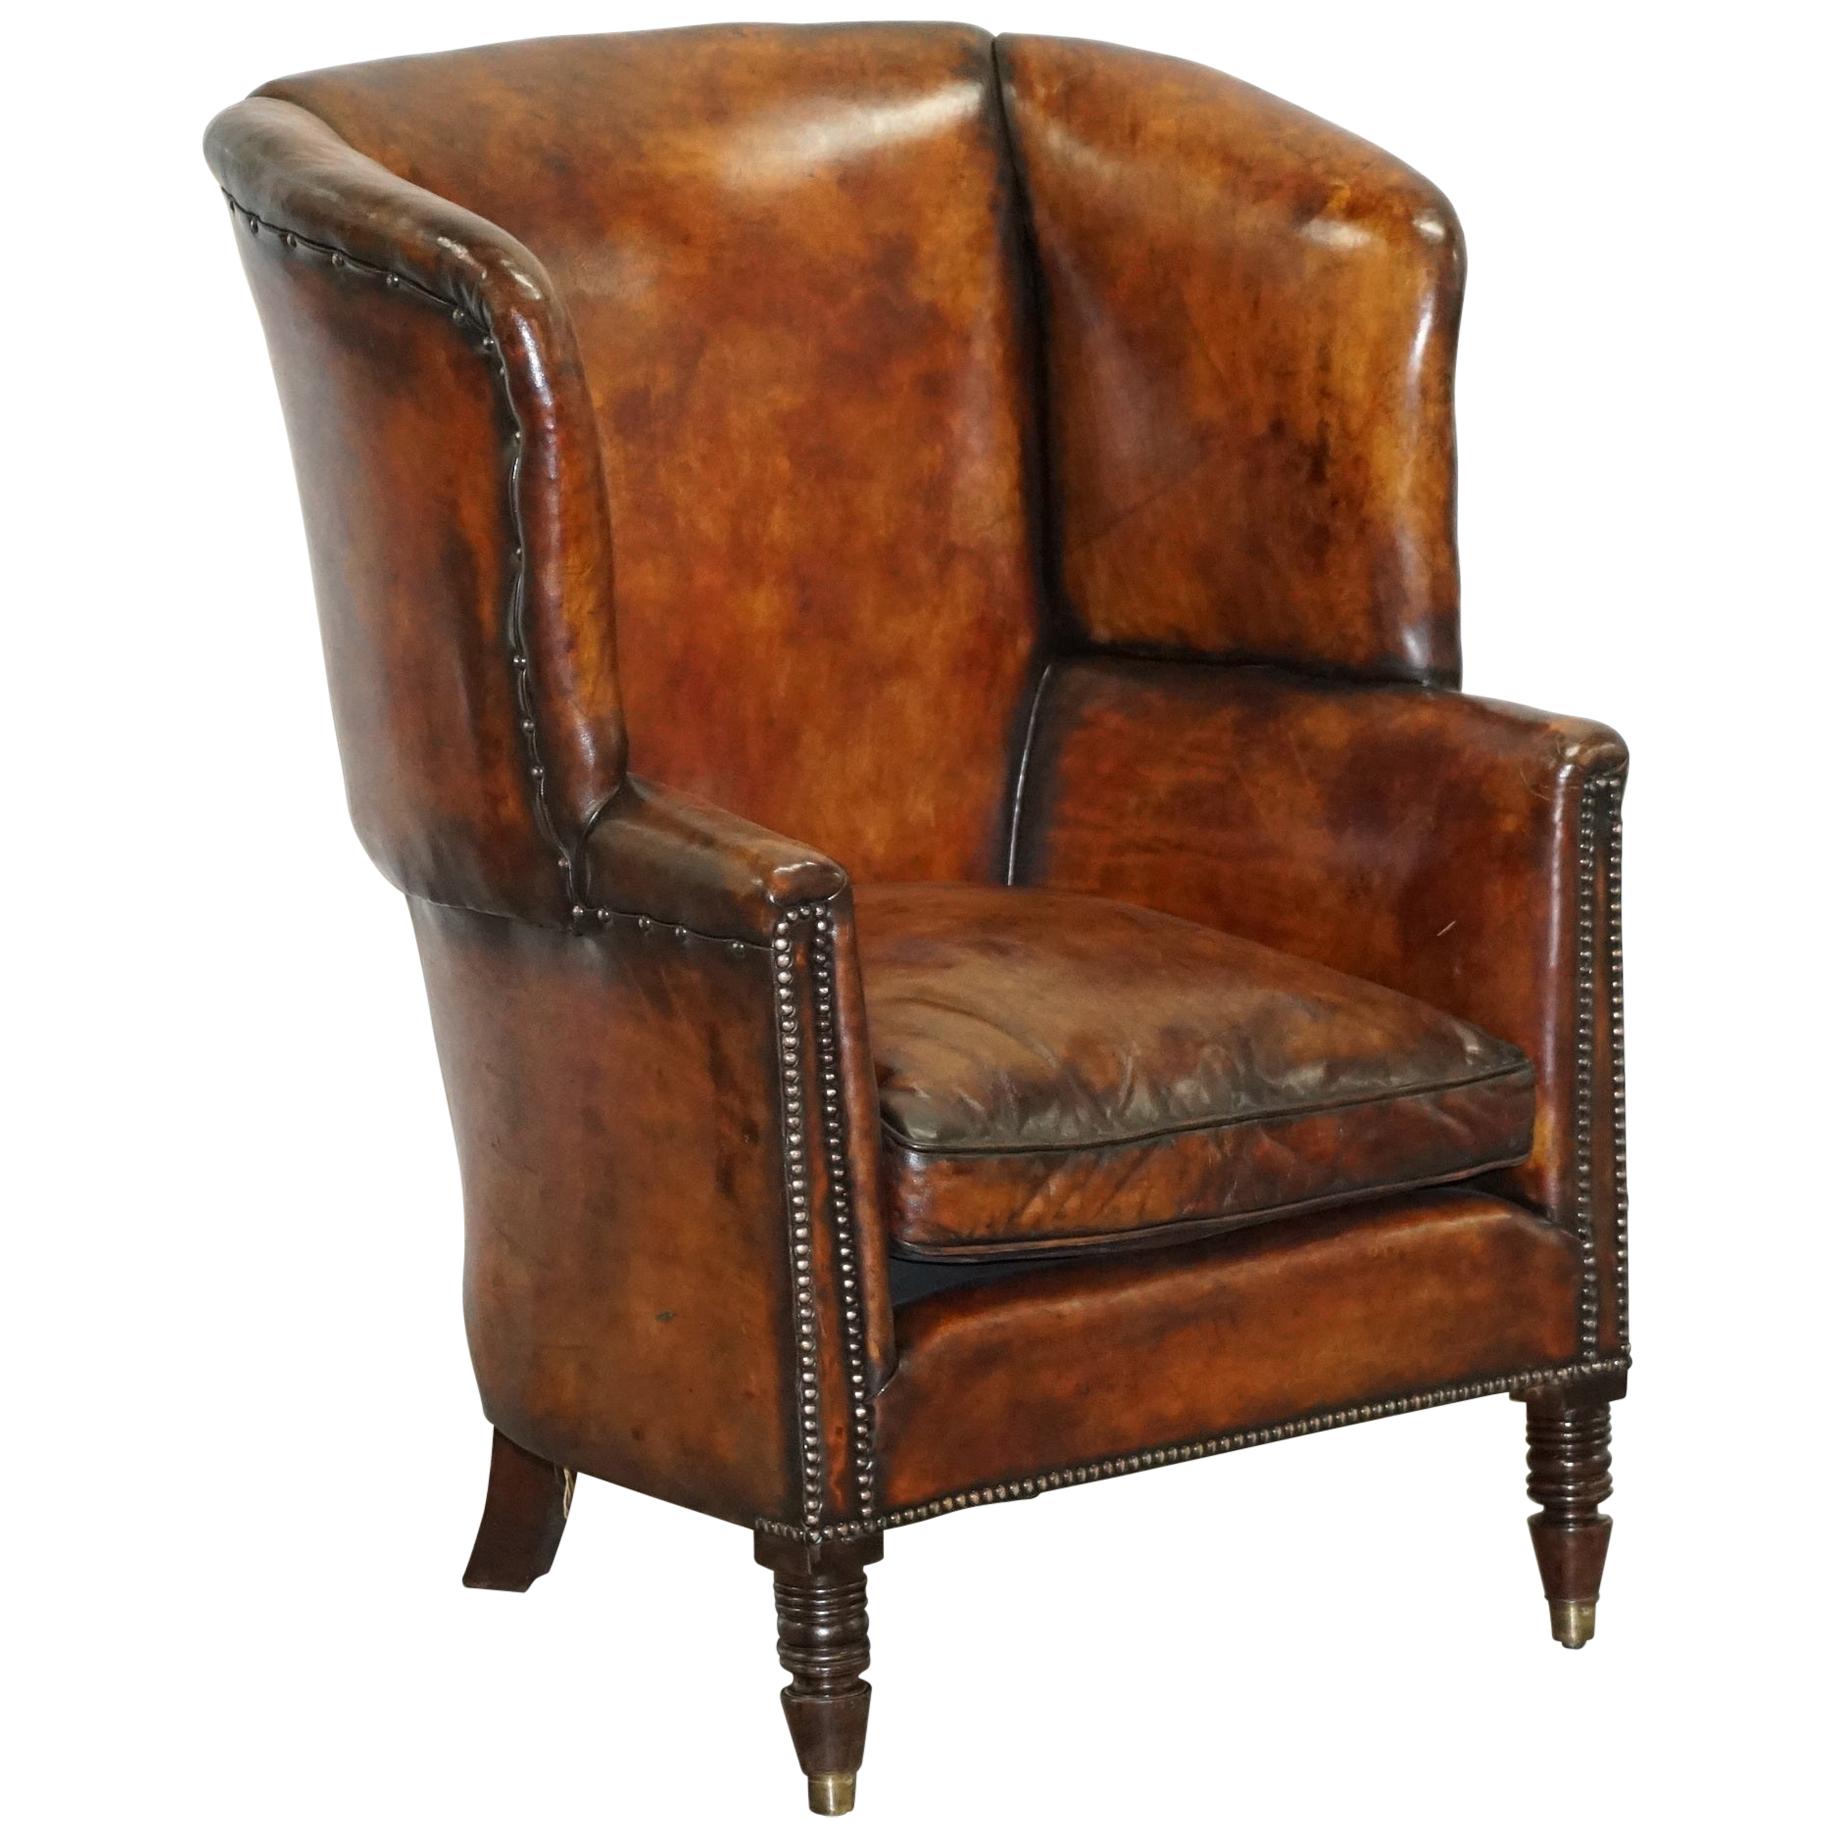 Sublime Restored Chestnut Brown Leather Regency 1810 Porters Wingback Armchair